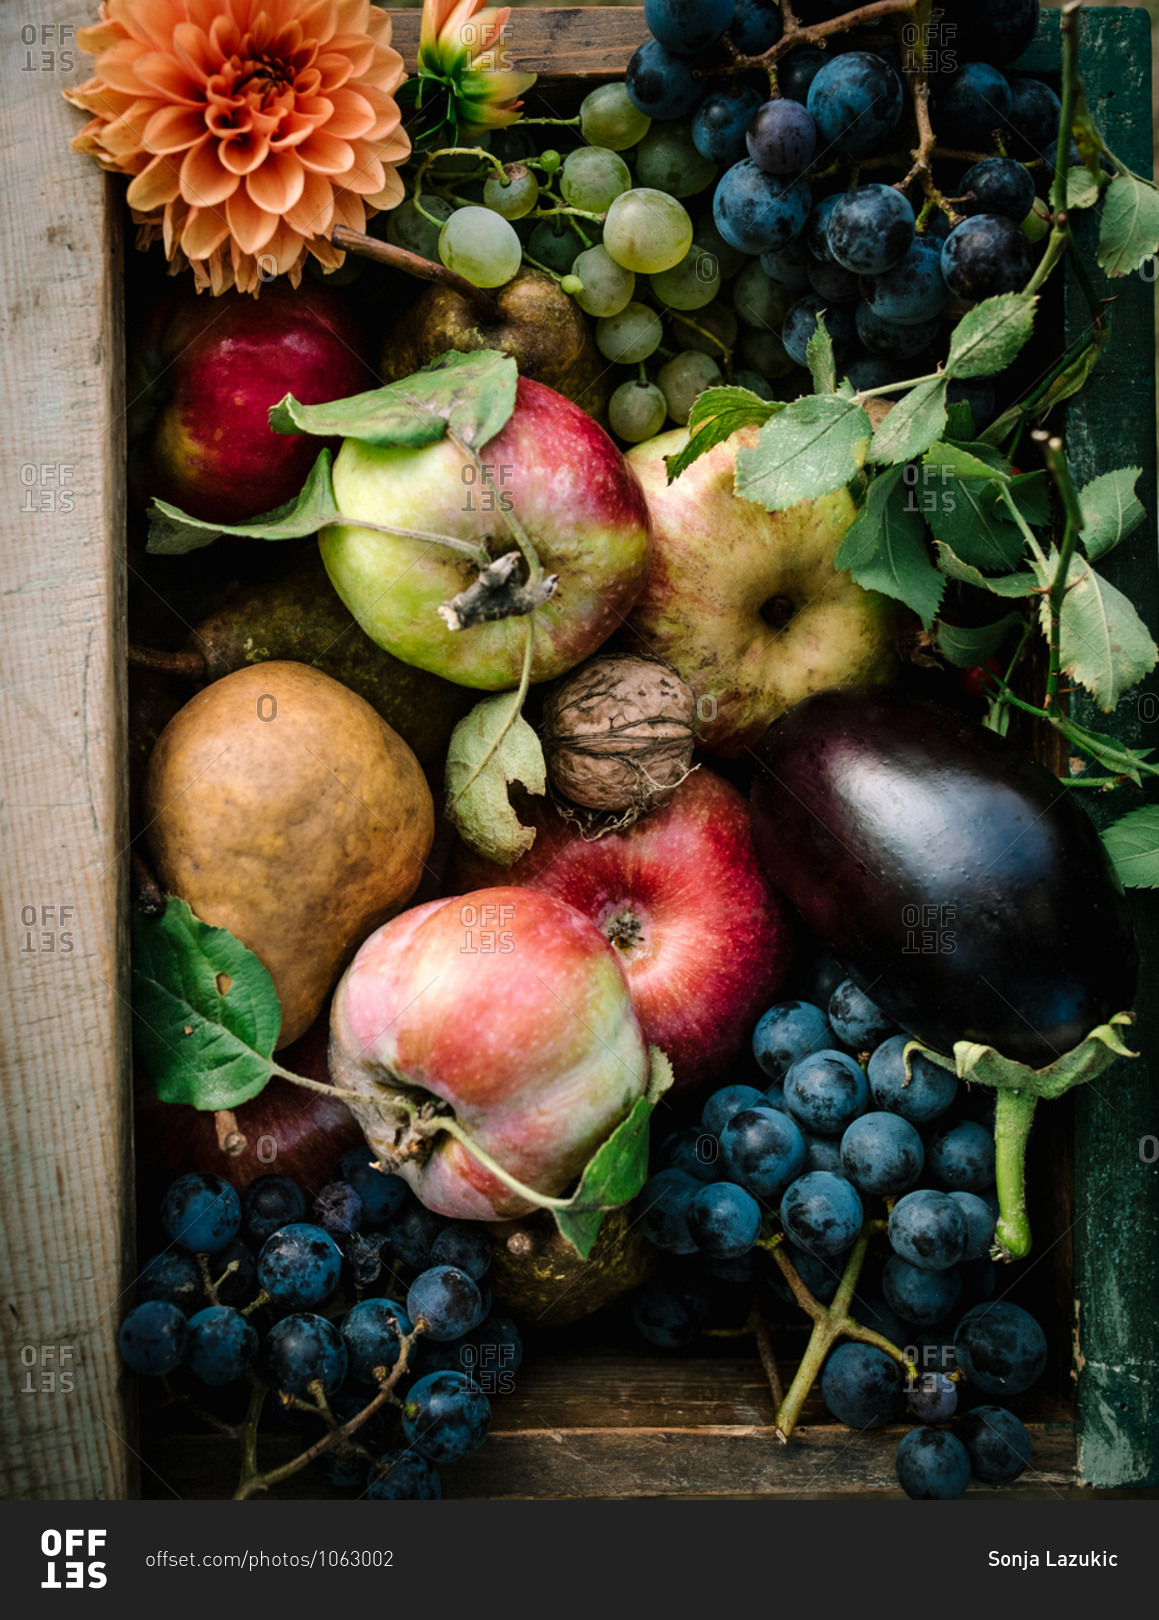 Overhead view of fruits and veggies in a wooden box